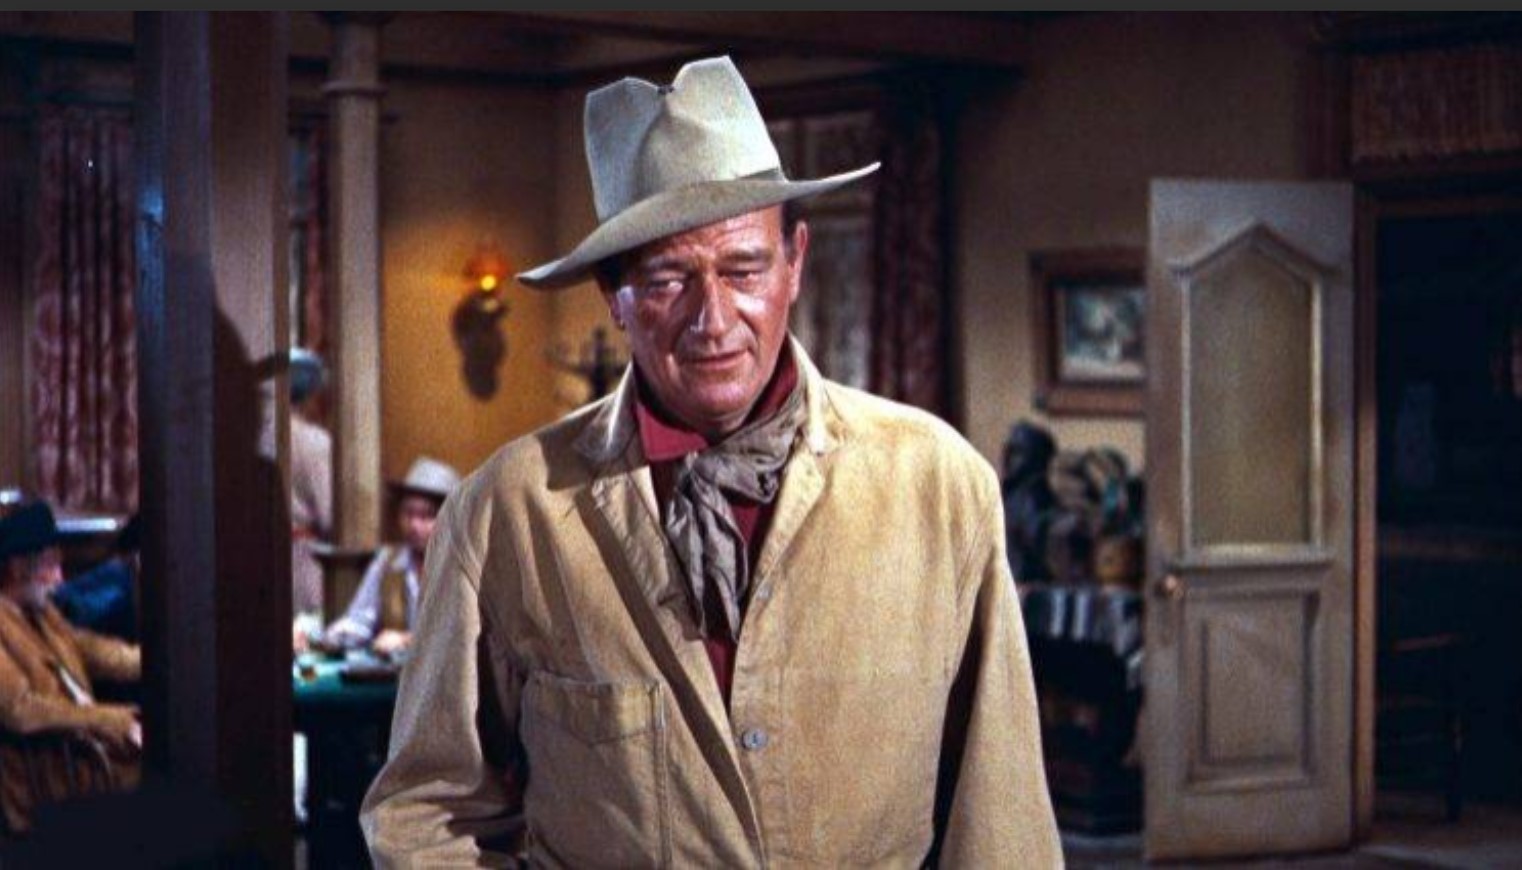 Although he was raised in Southern California, Wayne was born in Winterset, Iowa. In the 1930s, he appeared in many B movies with leading roles, most of which were Westerns. Wayne appeared in 142 films after becoming a well-known star with John Ford's Stagecoach (1939). John Wayne "personified the nation's frontier legacy for millions of people," claims one biographer.